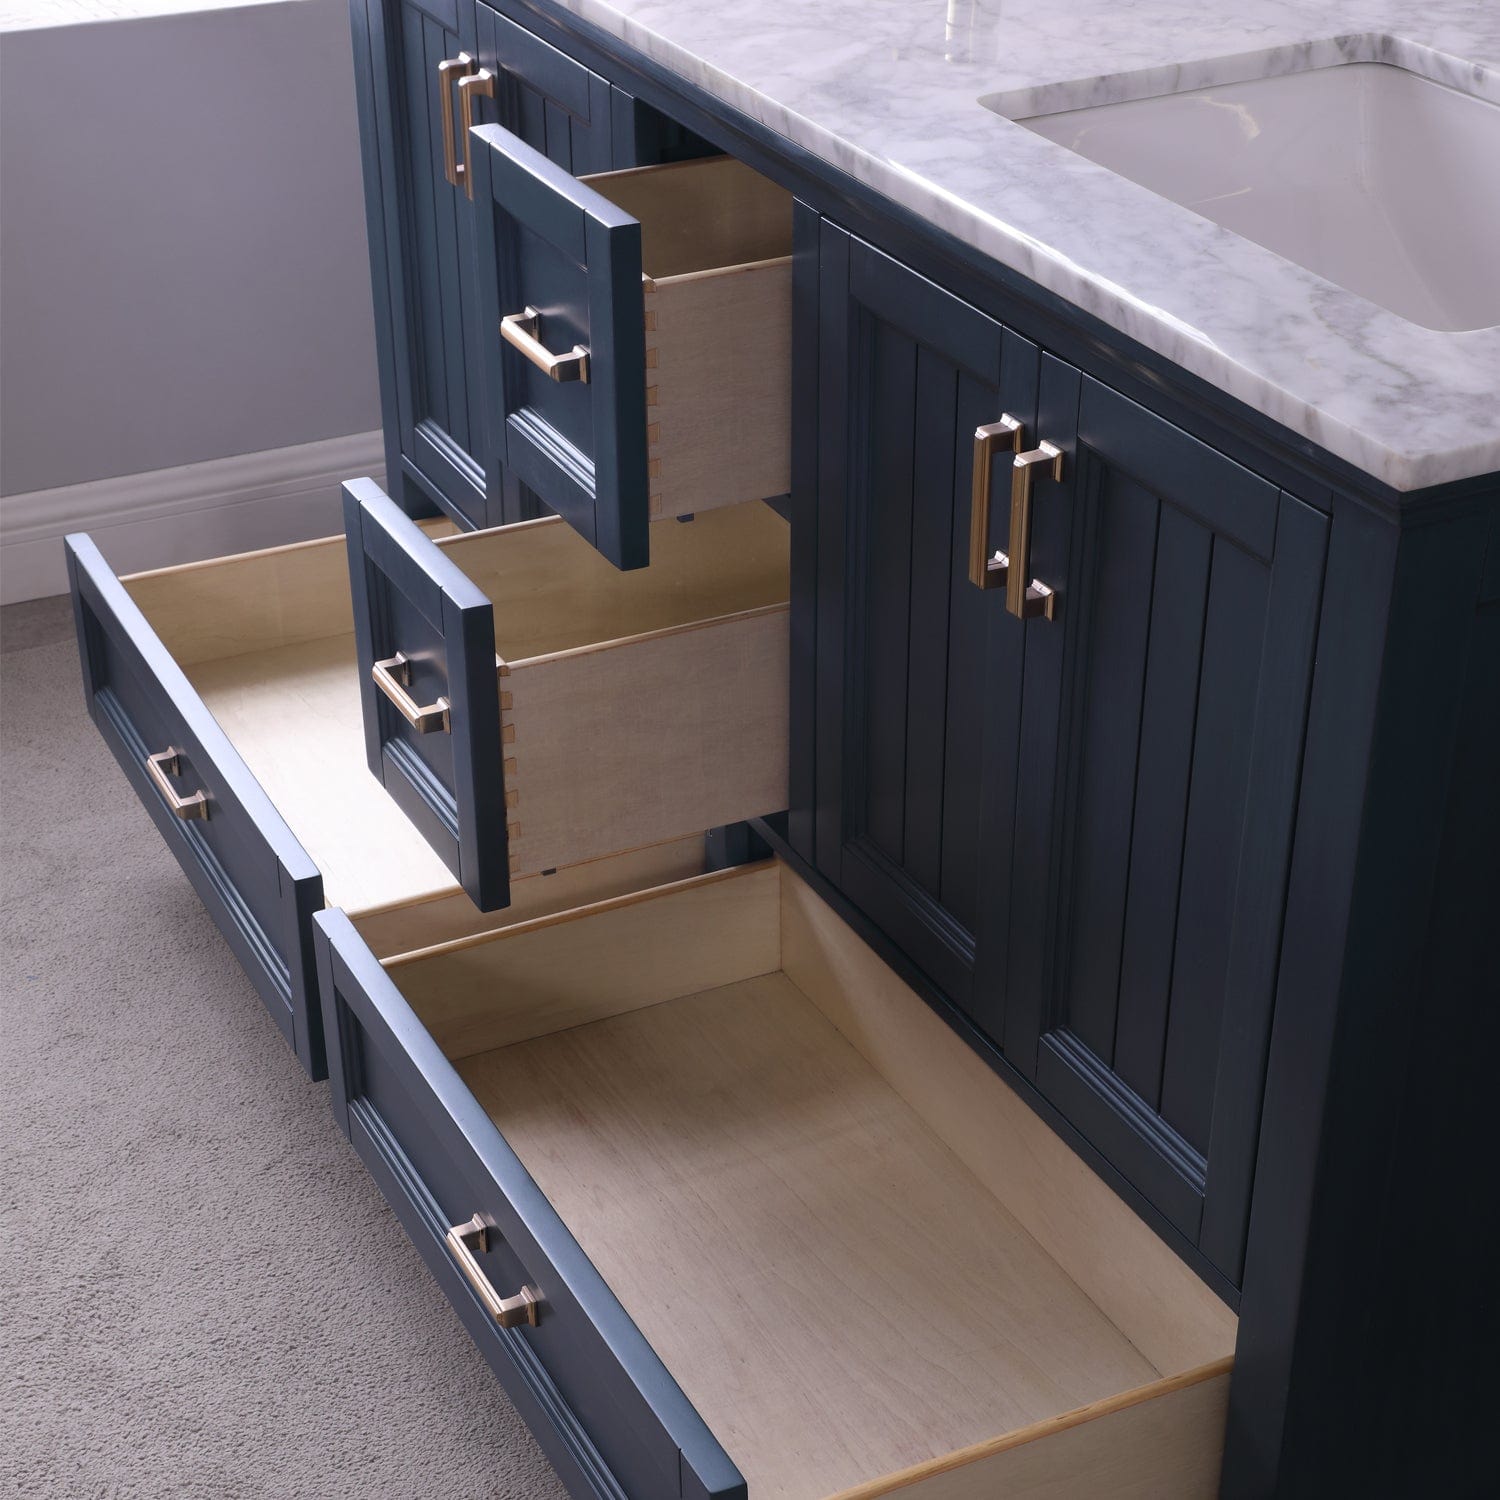 Altair Isla 60" Double Bathroom Vanity Set in Classic Blue and Carrara White Marble Countertop without Mirror 538060-CB-CA-NM - Molaix631112970921Vanity538060-CB-CA-NM